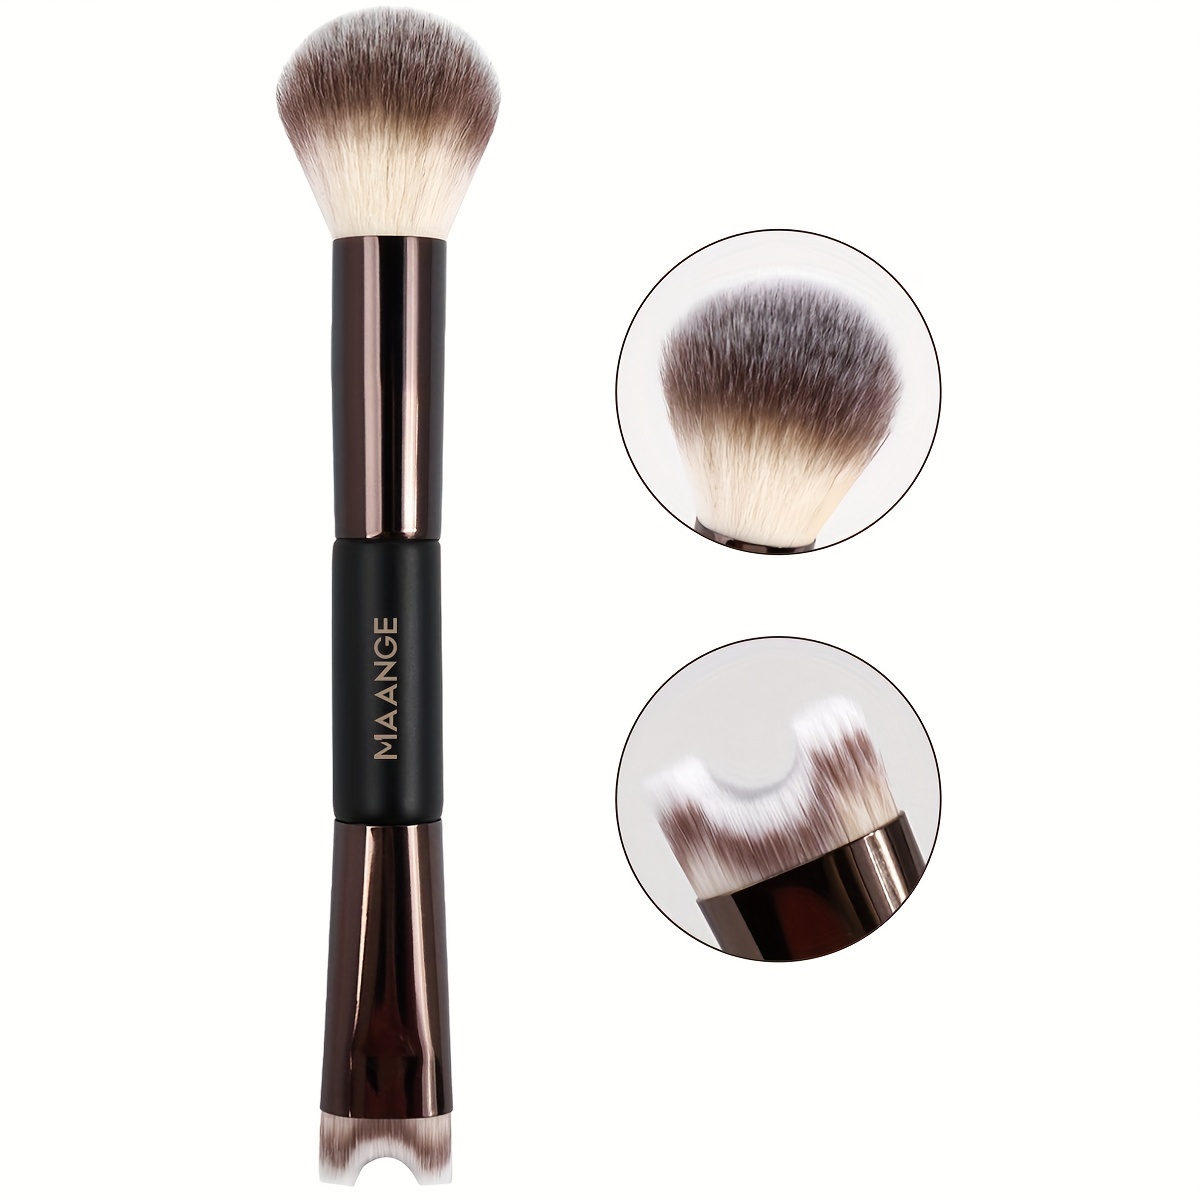 

Maange Dual-ended Makeup Brush - Blush, Nose Contour & Powder - Versatile Facial Tool For All Skin Types, Fragrance-free, Nylon Bristles, Abs Handle - Perfect Gift For Women